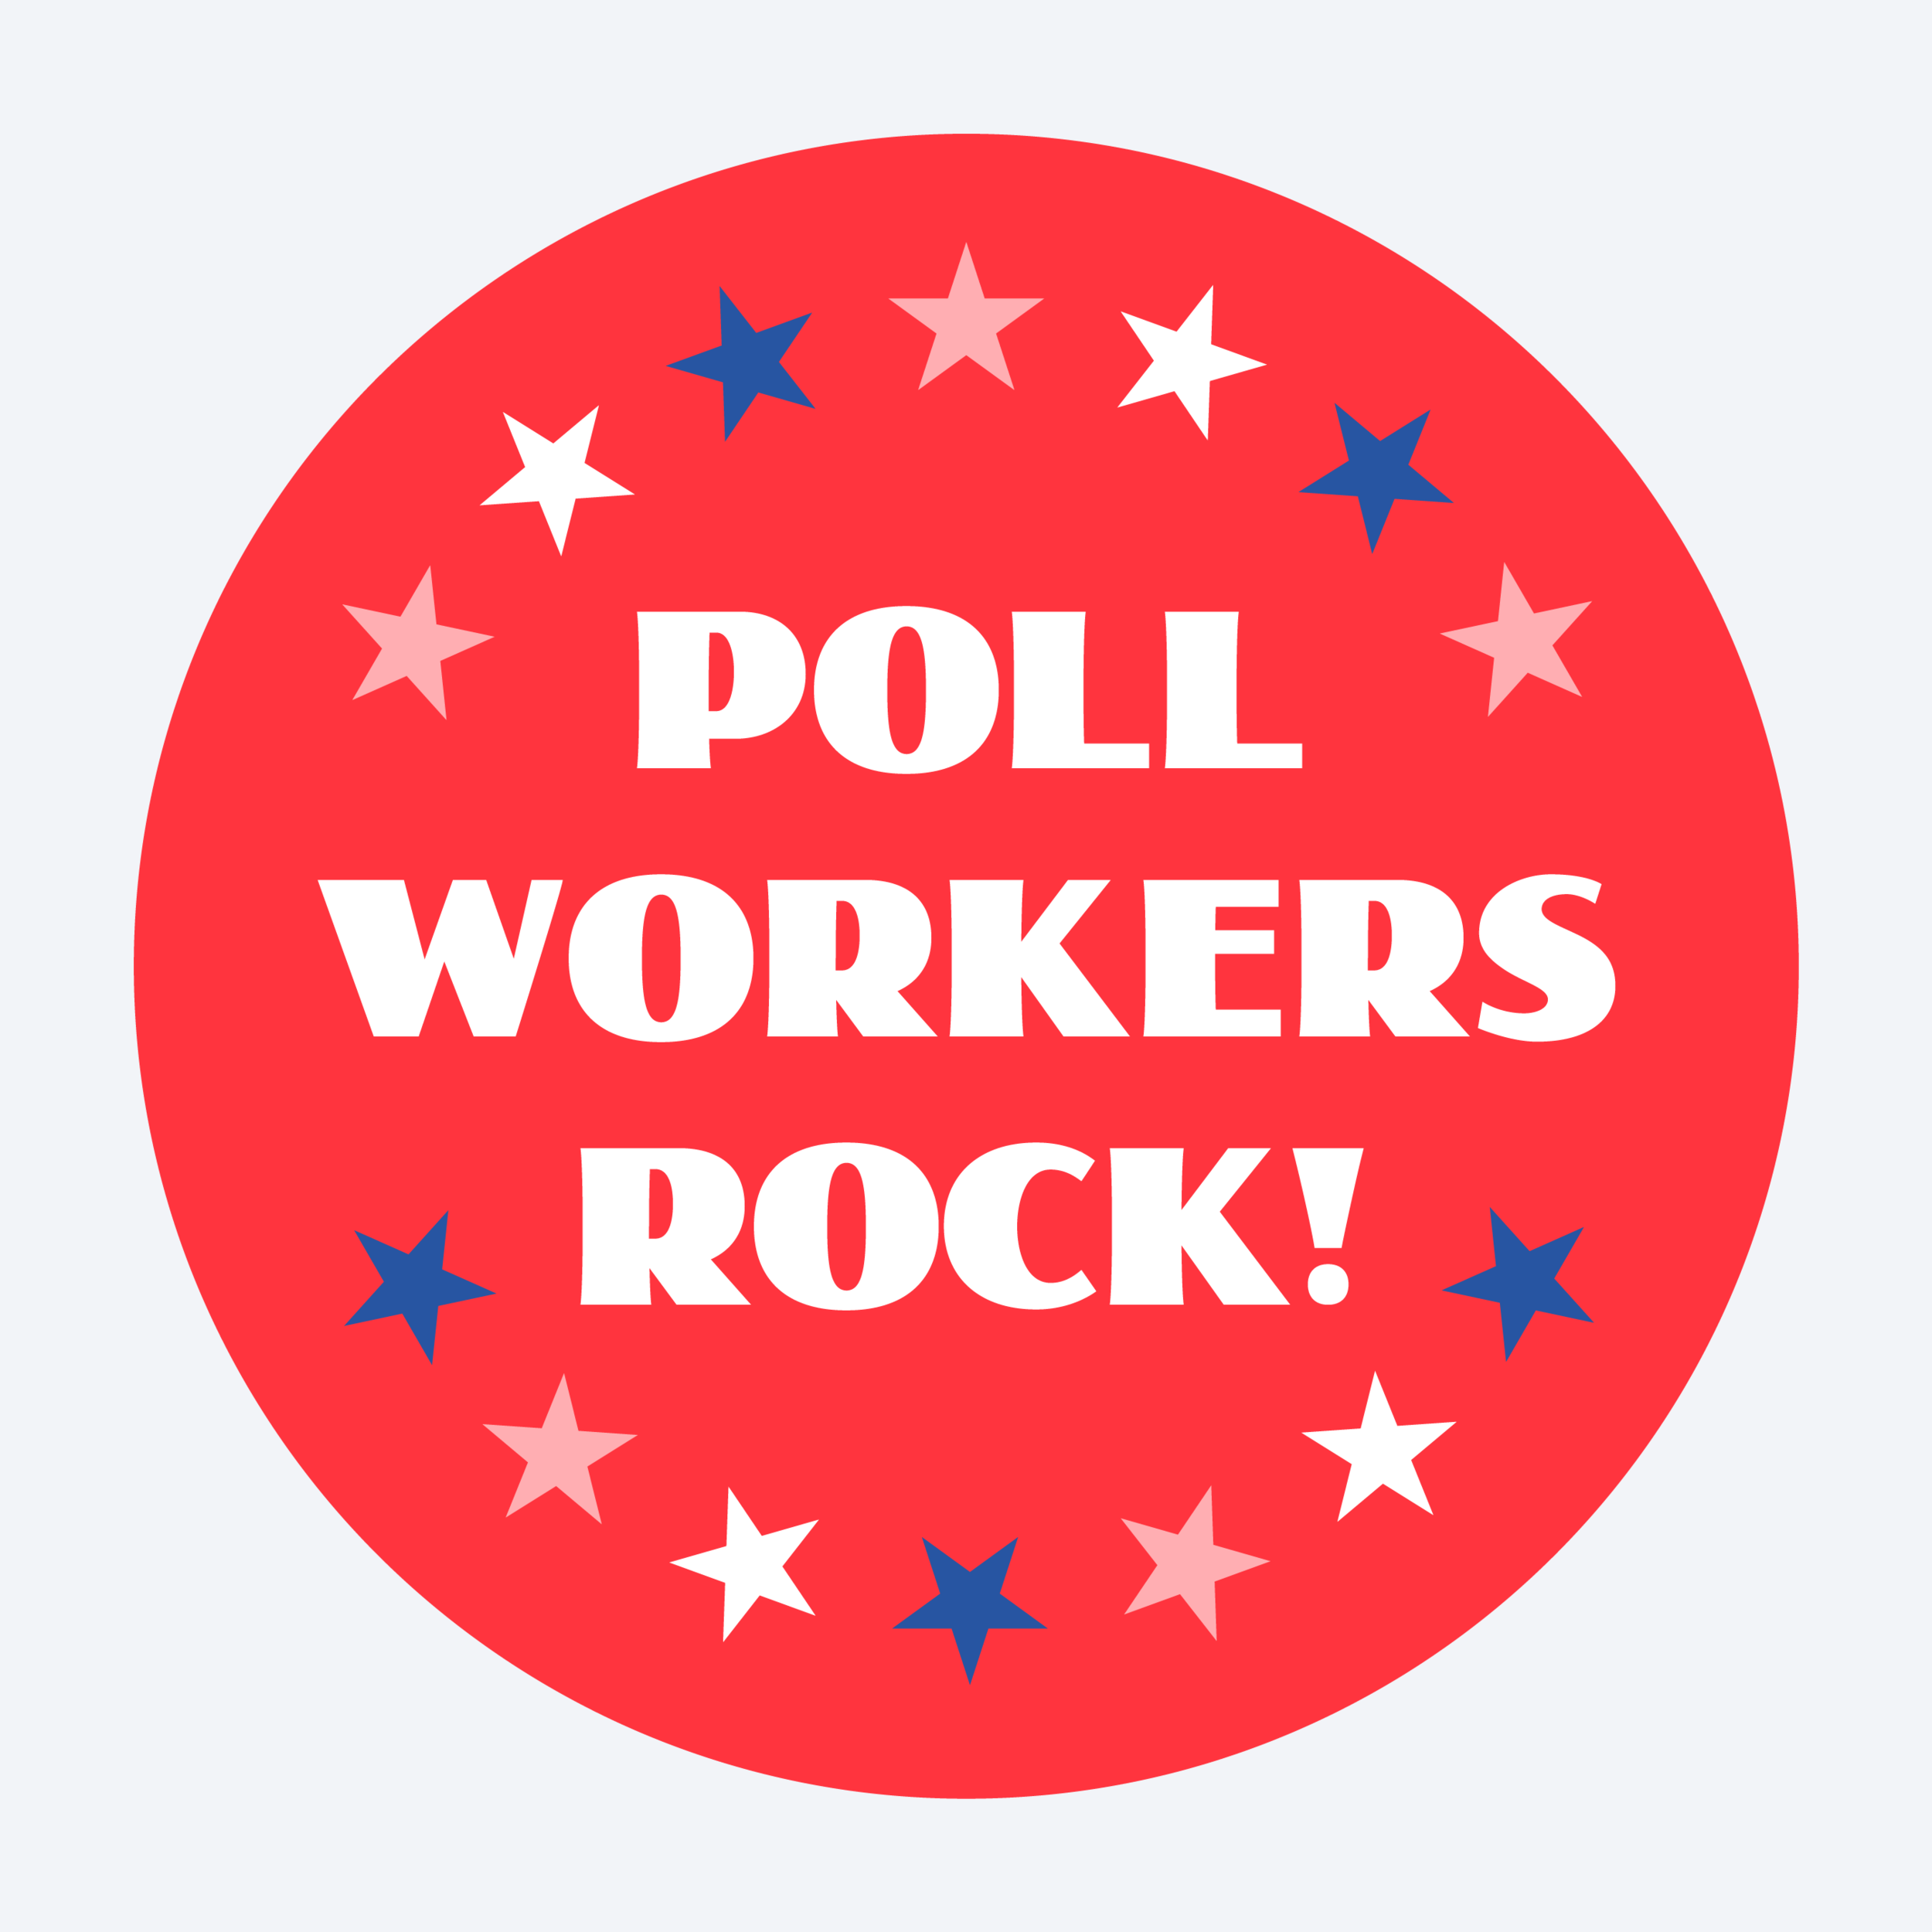 WeVoted-Stickers_Artboard 1 copy 11.png